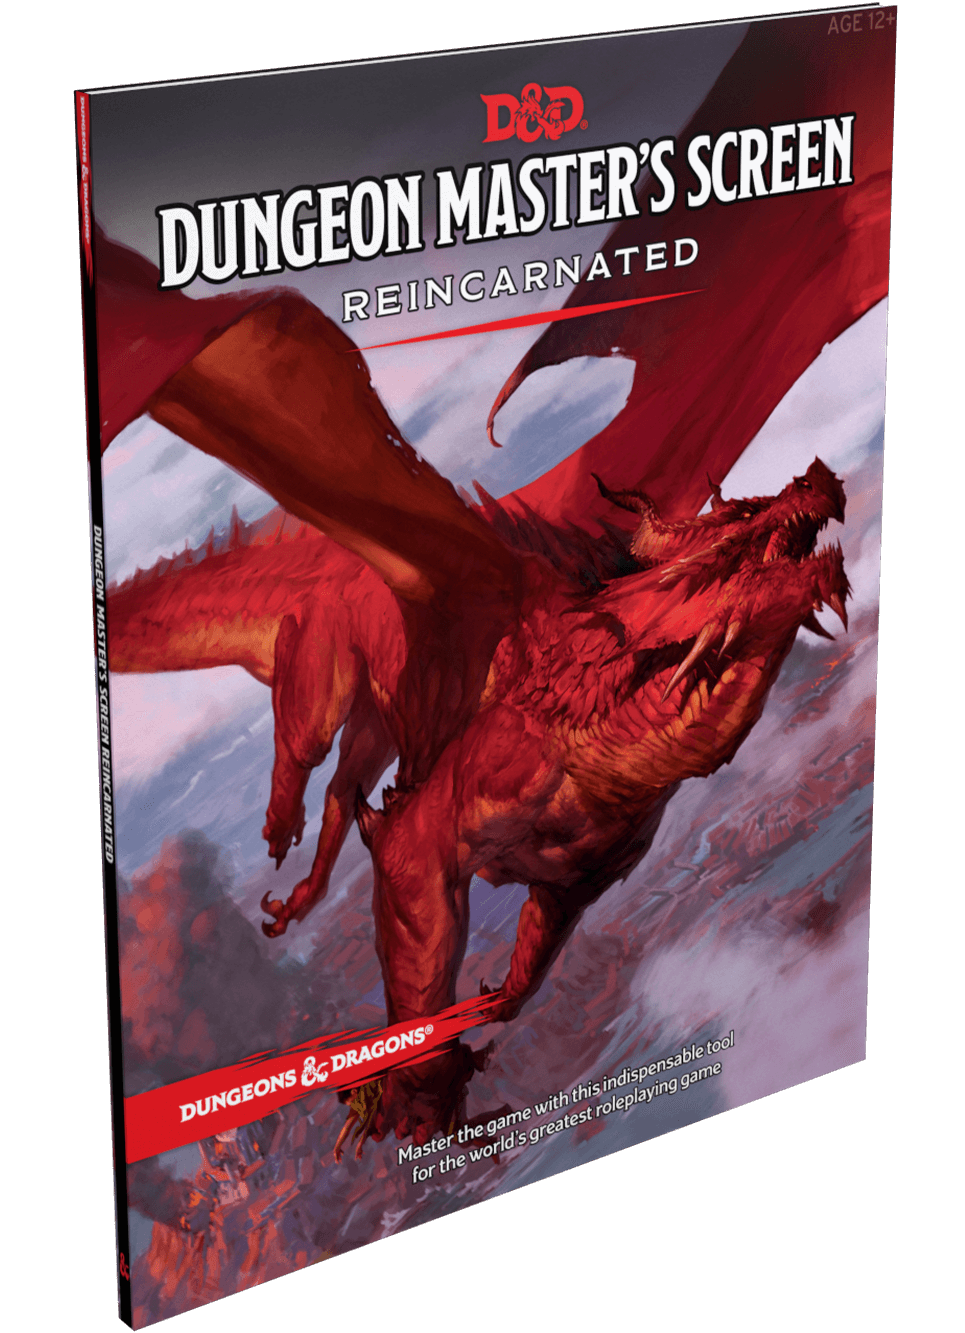 Dungeons & Dragons 5th edition - Dungeon Master's Screen Reincarnated